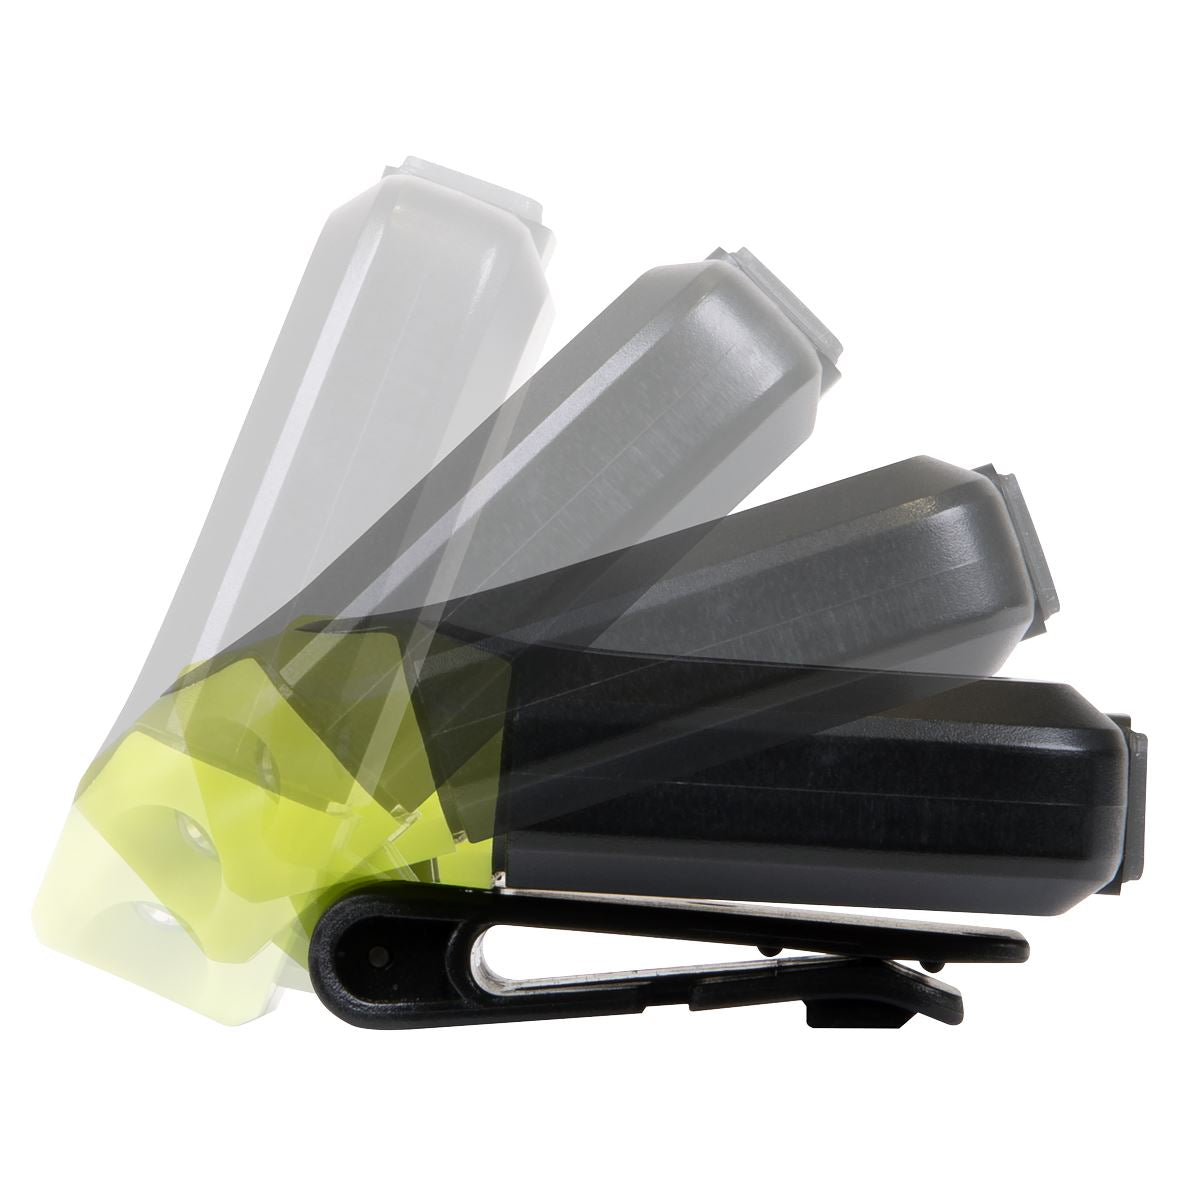 Sealey 2W & 1.5W SMD LED Rechargeable Clip Light with Auto-Sensor